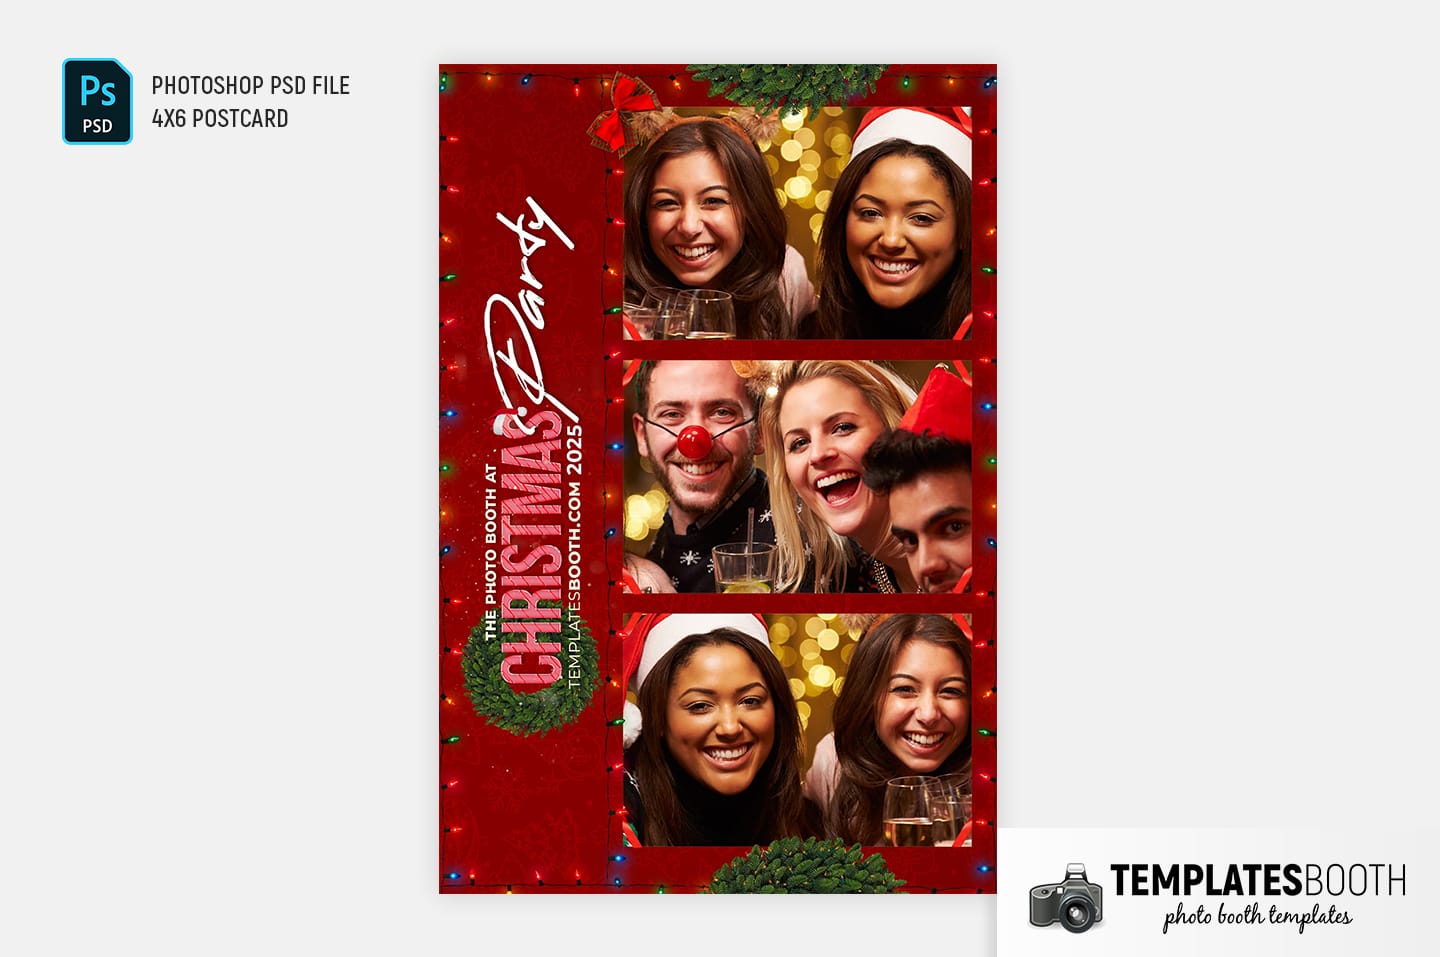 Christmas Party Photo Booth Template (4x6 Postcard)